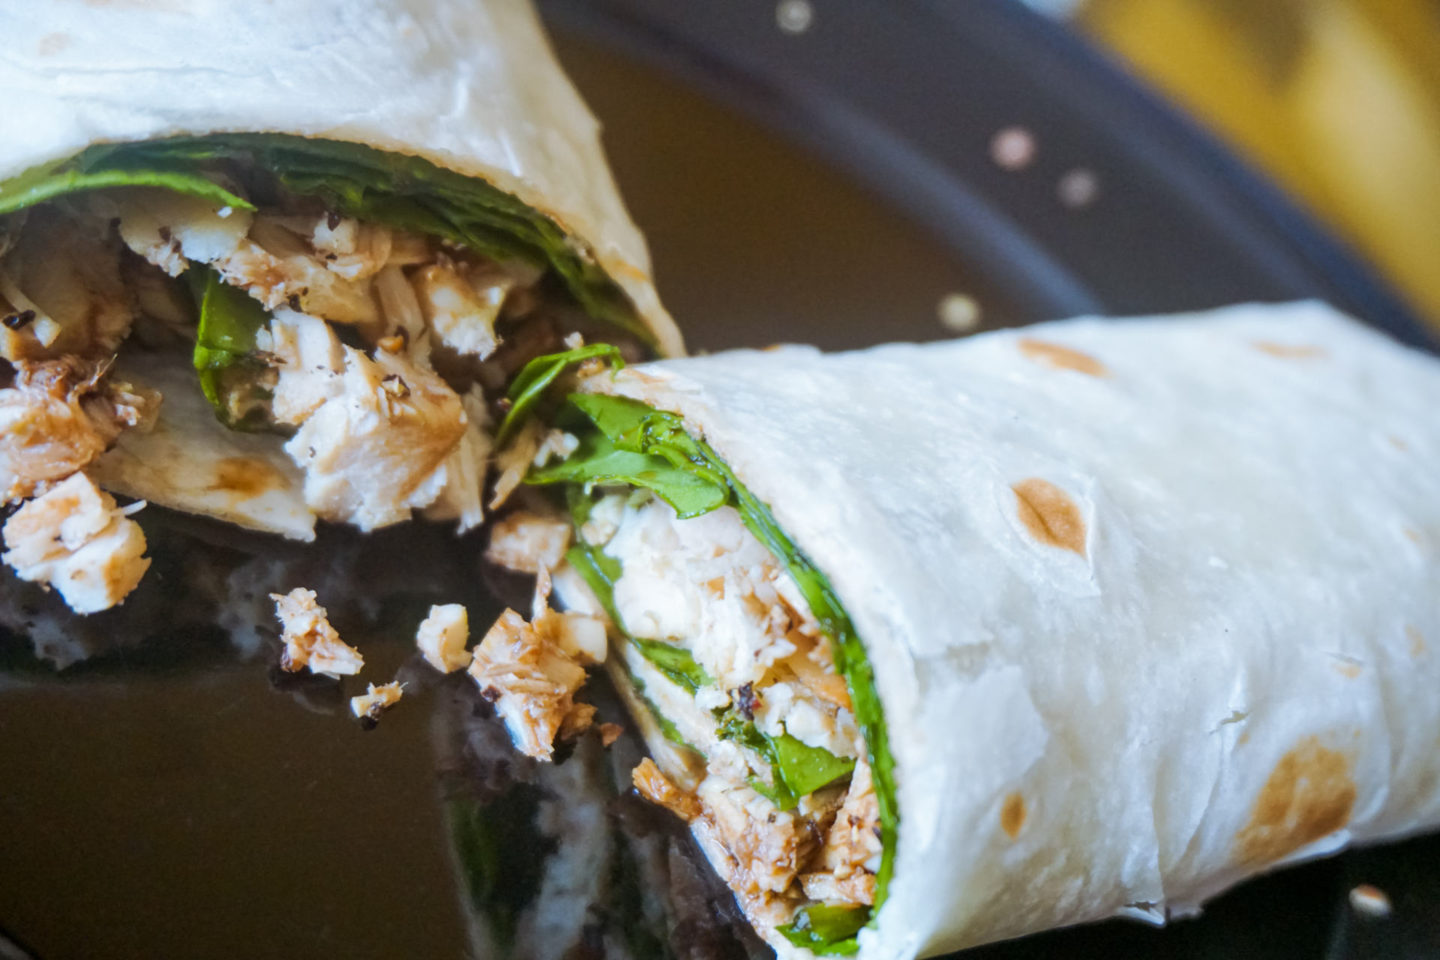 Recipes: My New Go-To Lunch Wrap